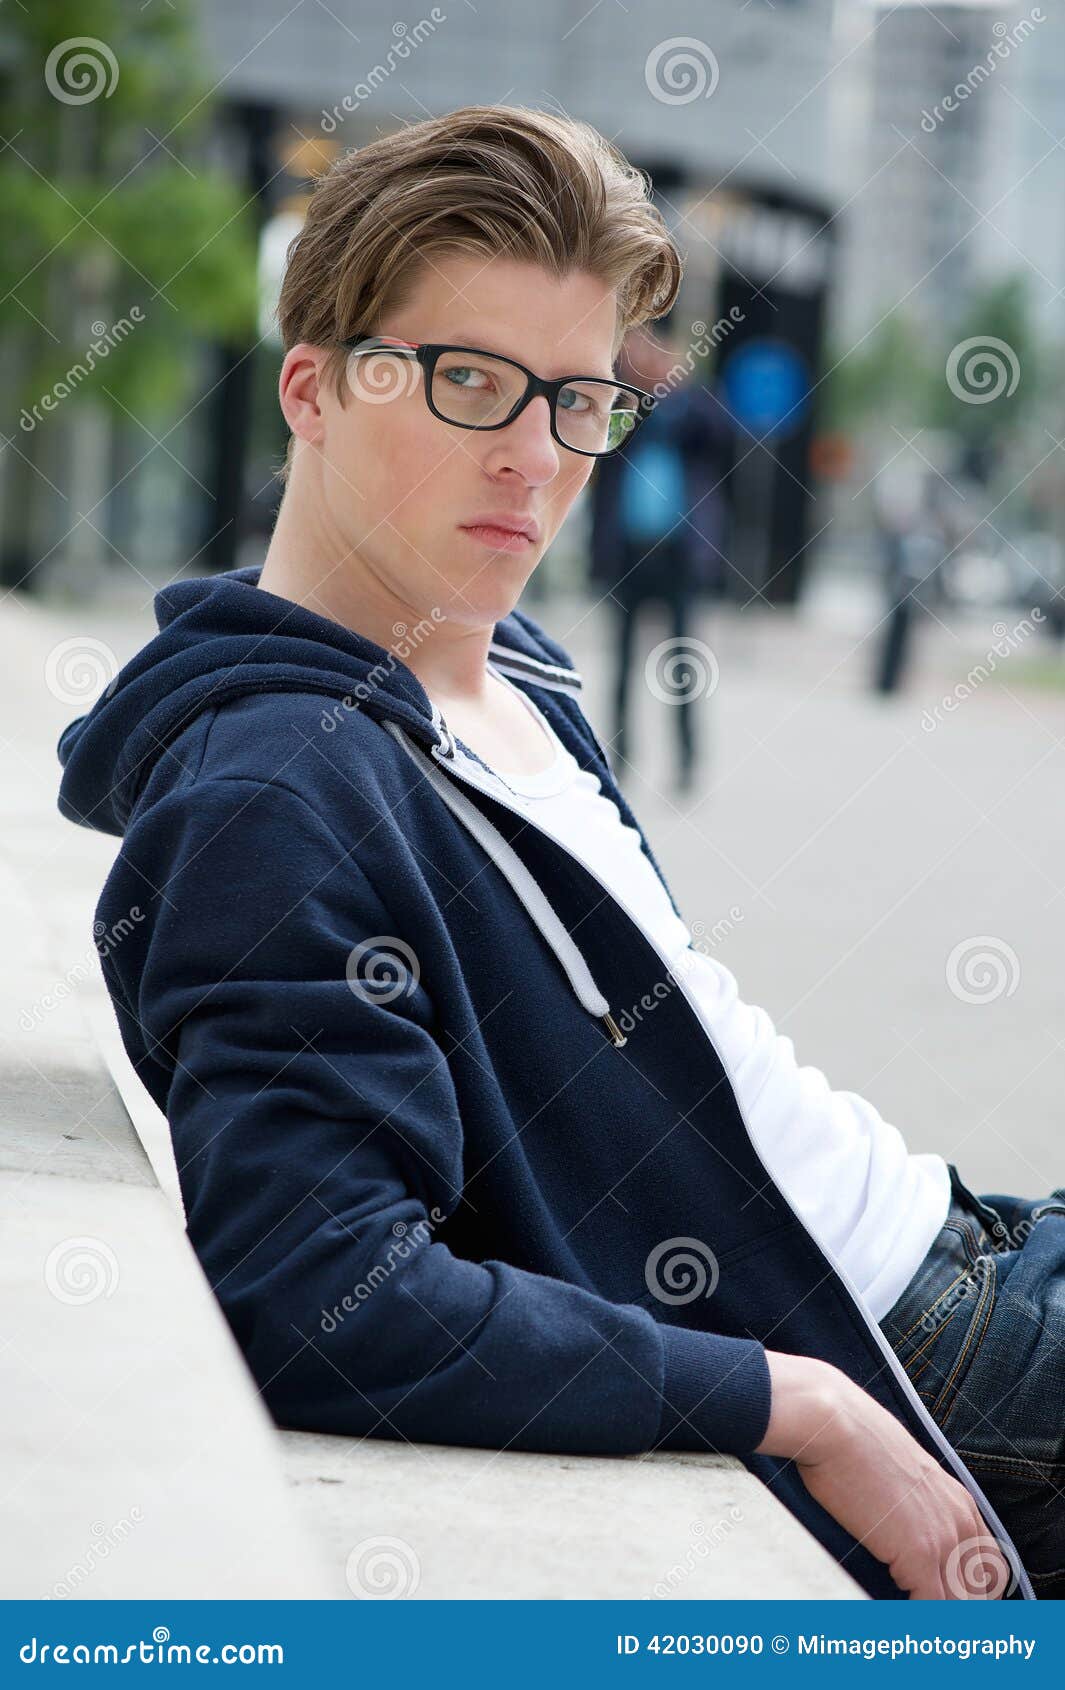 Cool Guy With Glasses Stock Photo - Image: 42030090